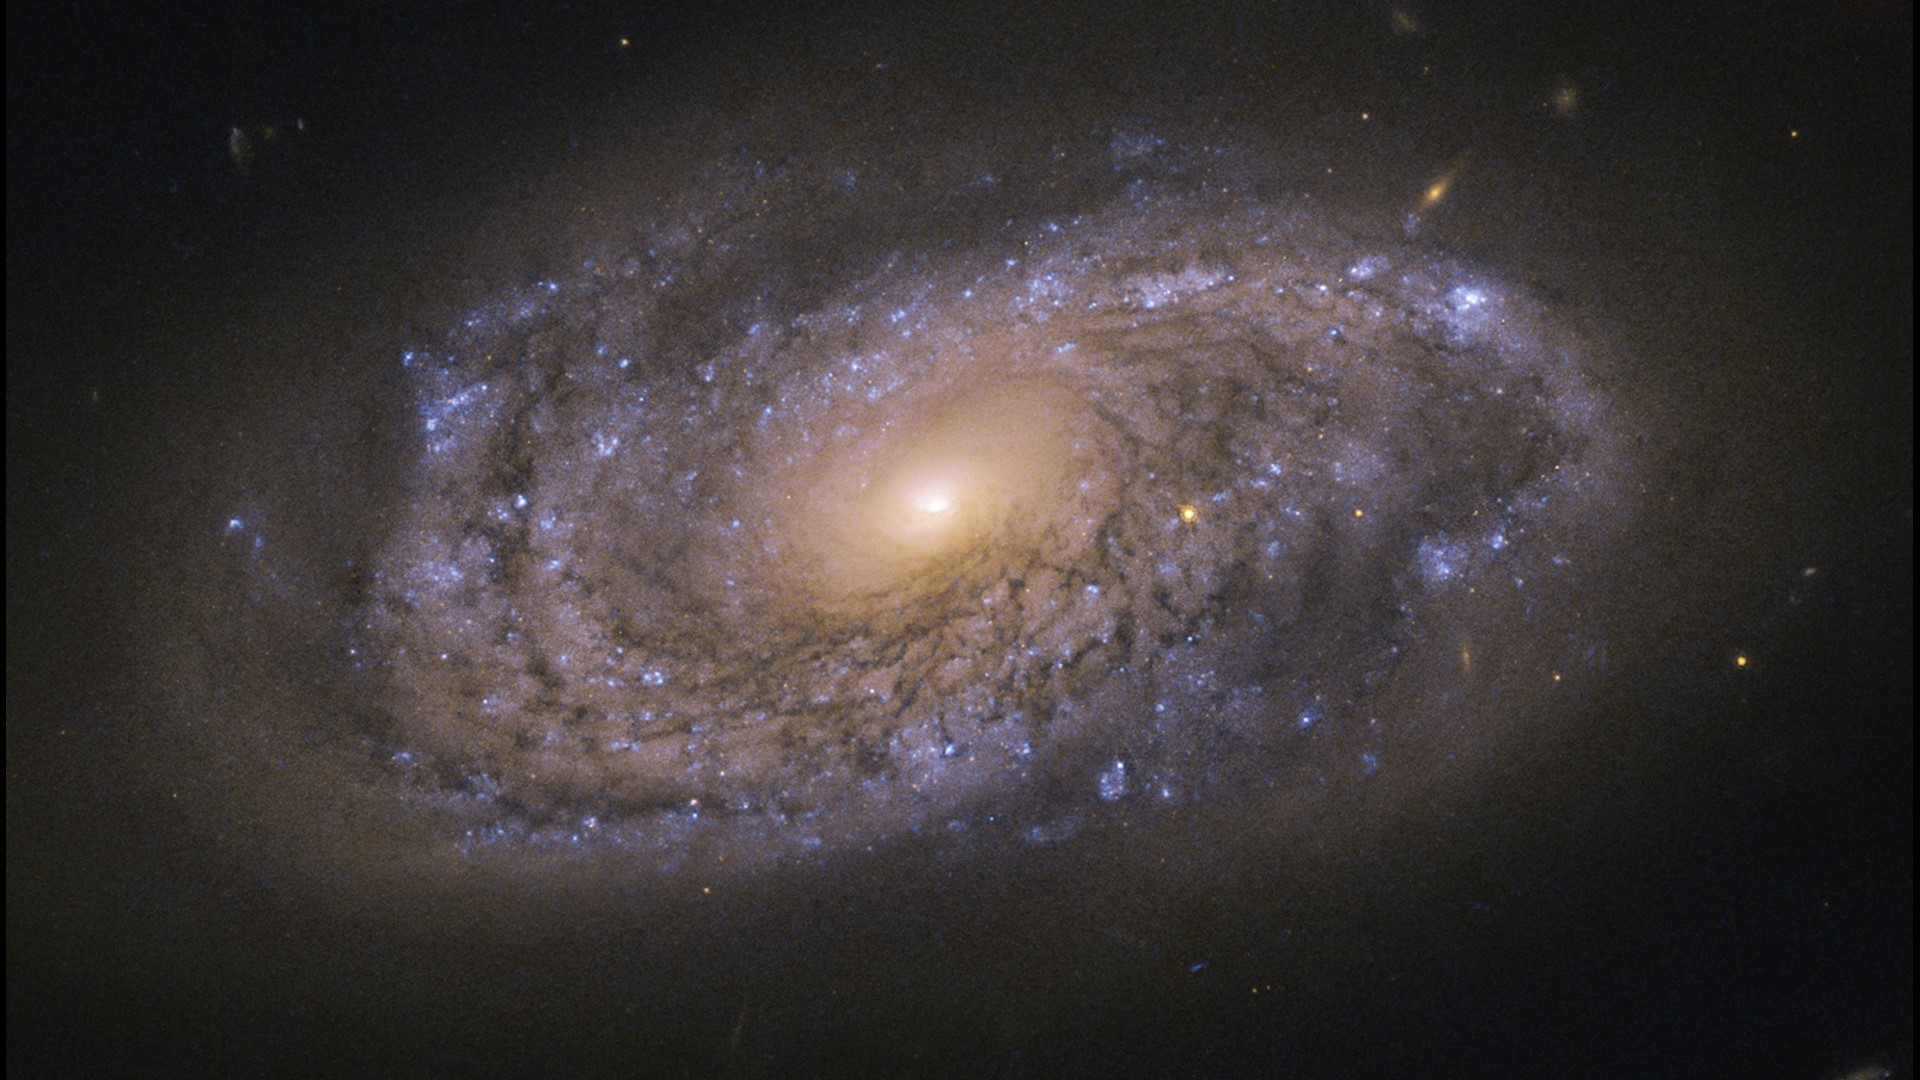 The stunning galaxy has everything from young and hot stars to older and cooler ones, and the Hubble Space Telescope captured it in all its glory.